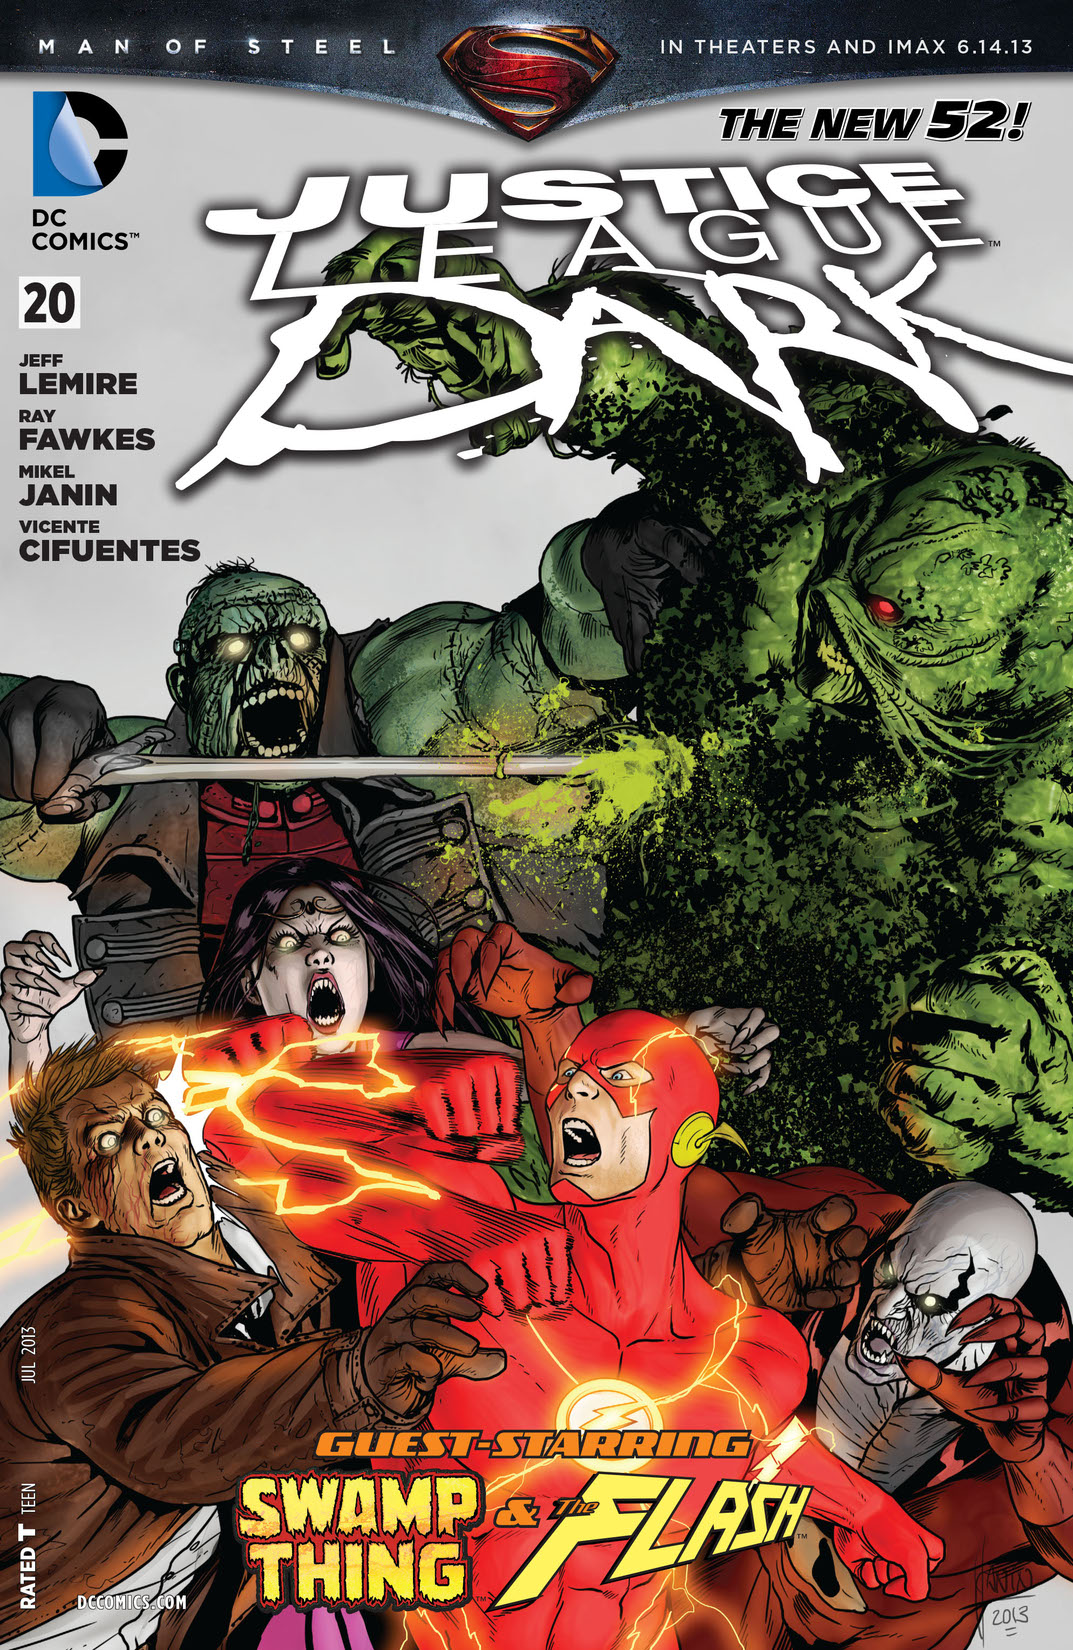 Justice League Dark (2011-) #20 preview images